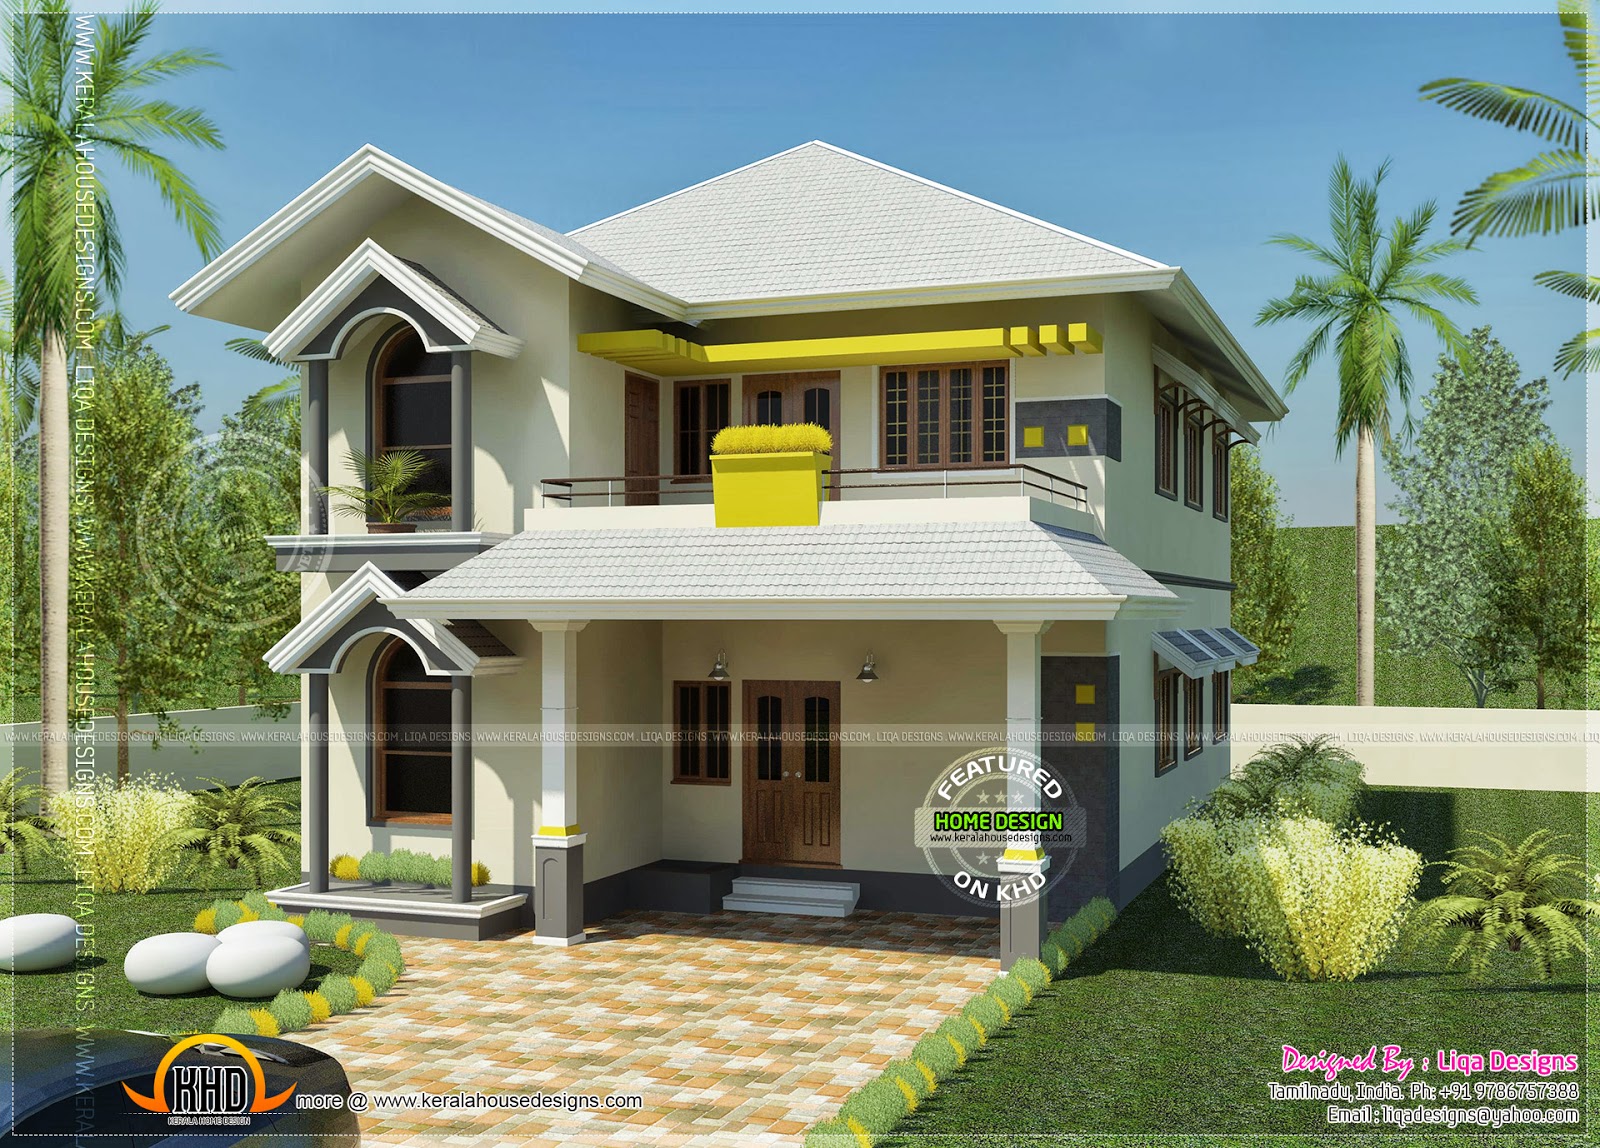  House  South Indian  style  in 2378 square feet Kerala home  design  and floor plans  8000 houses 